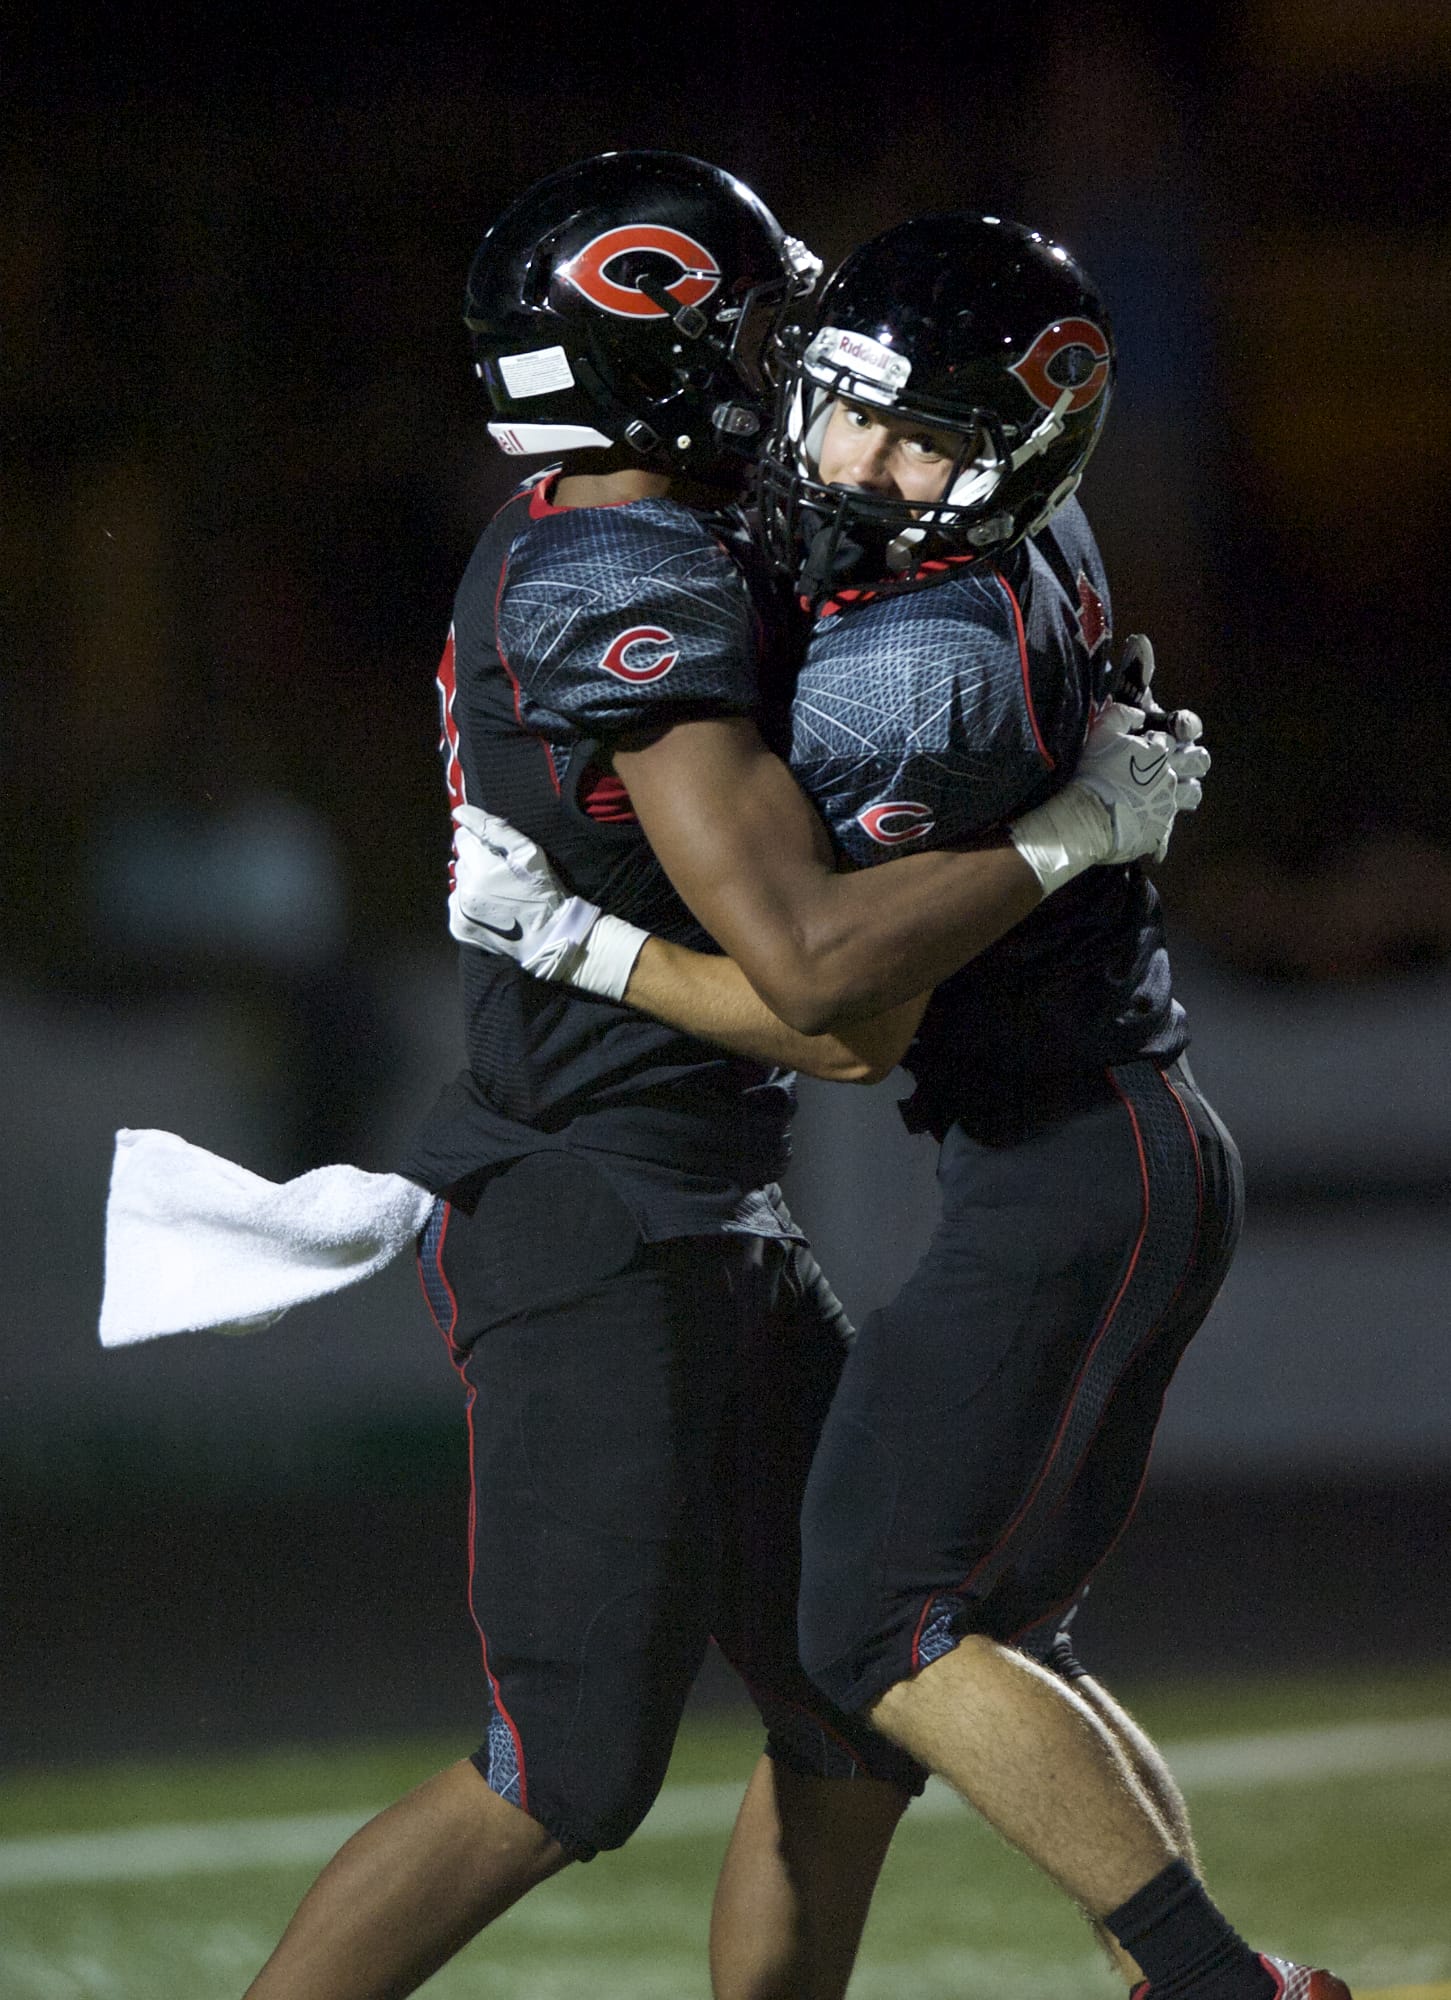 Zachary Kaufman/The Columbian
Jared Bentley, right, and James Price celebrate Bentley's scoring catch, the first Camas touchdown of the season.